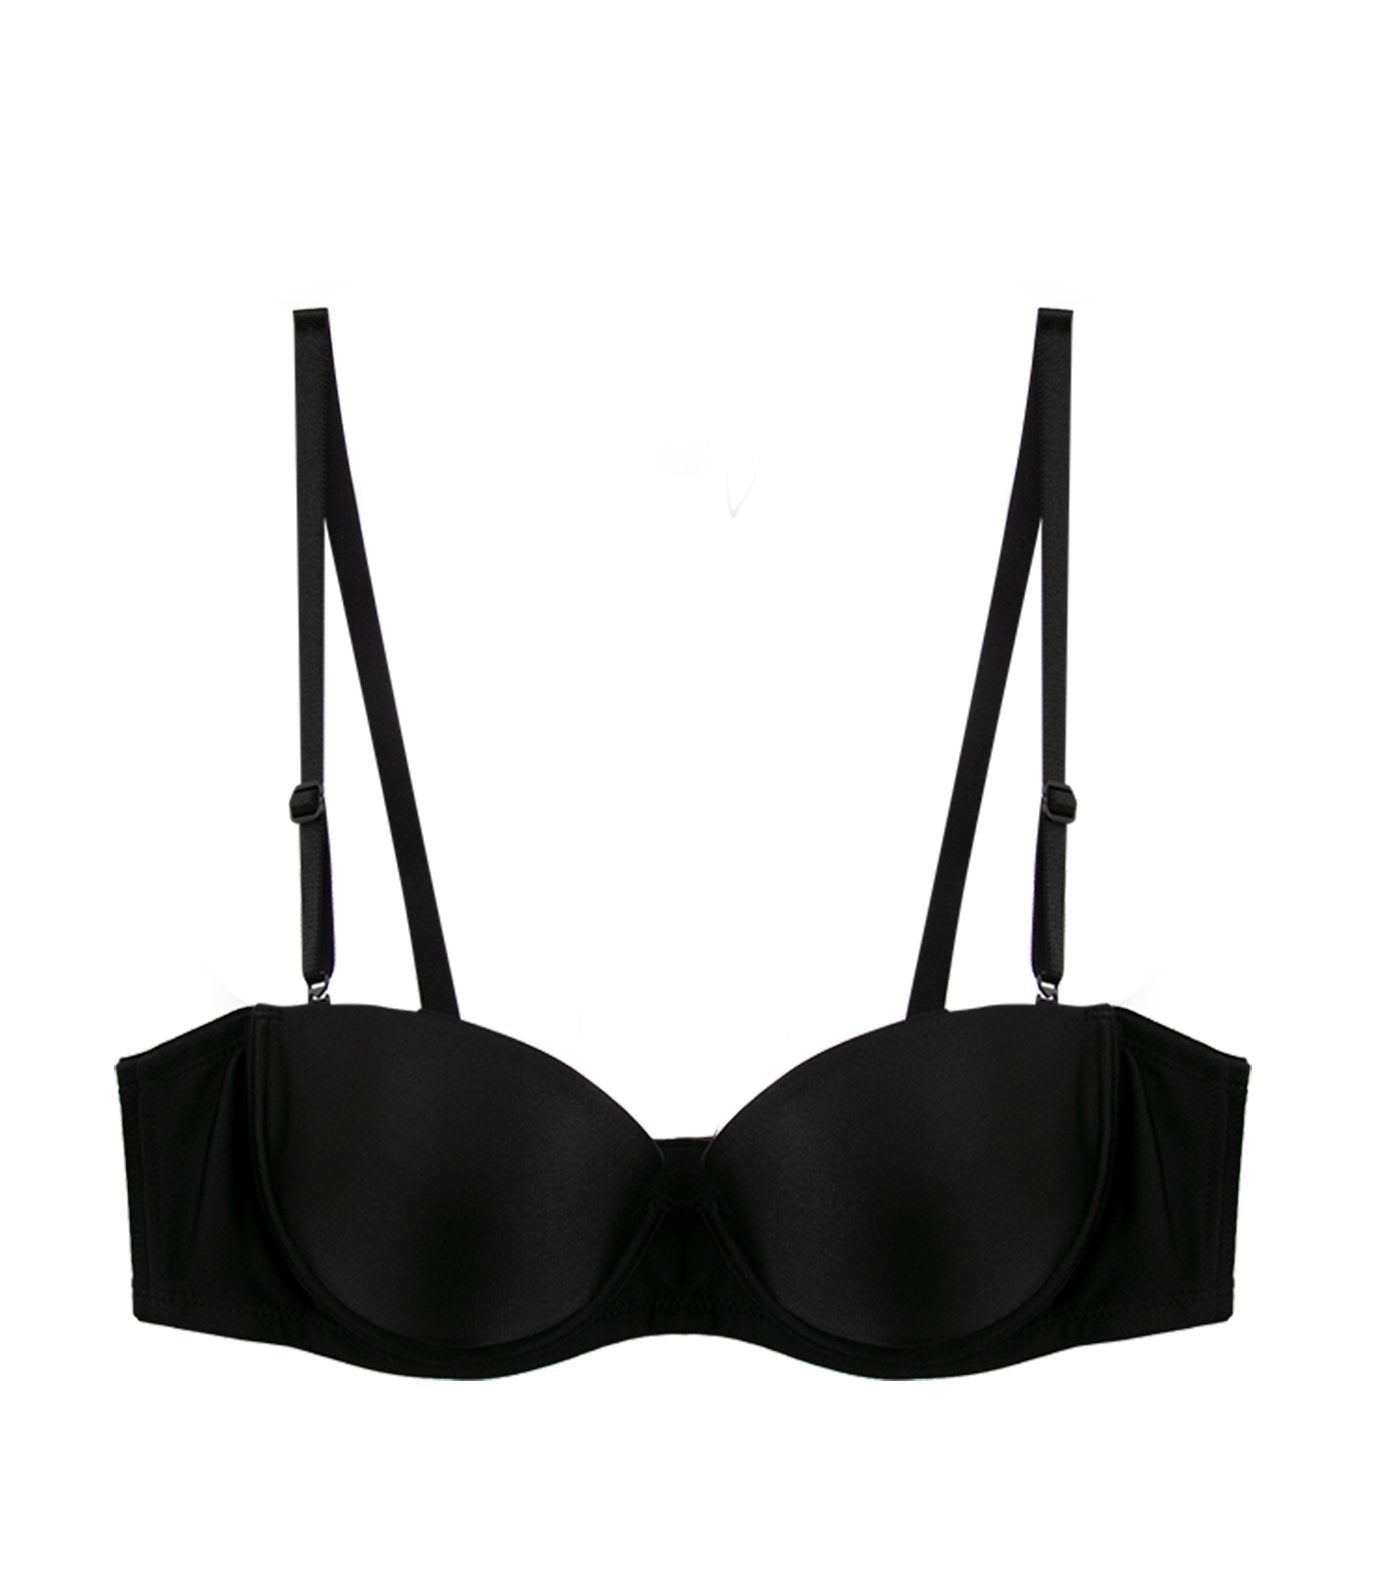 Simply Everyday Wired Push Up Detachable Bra in Black-Combination